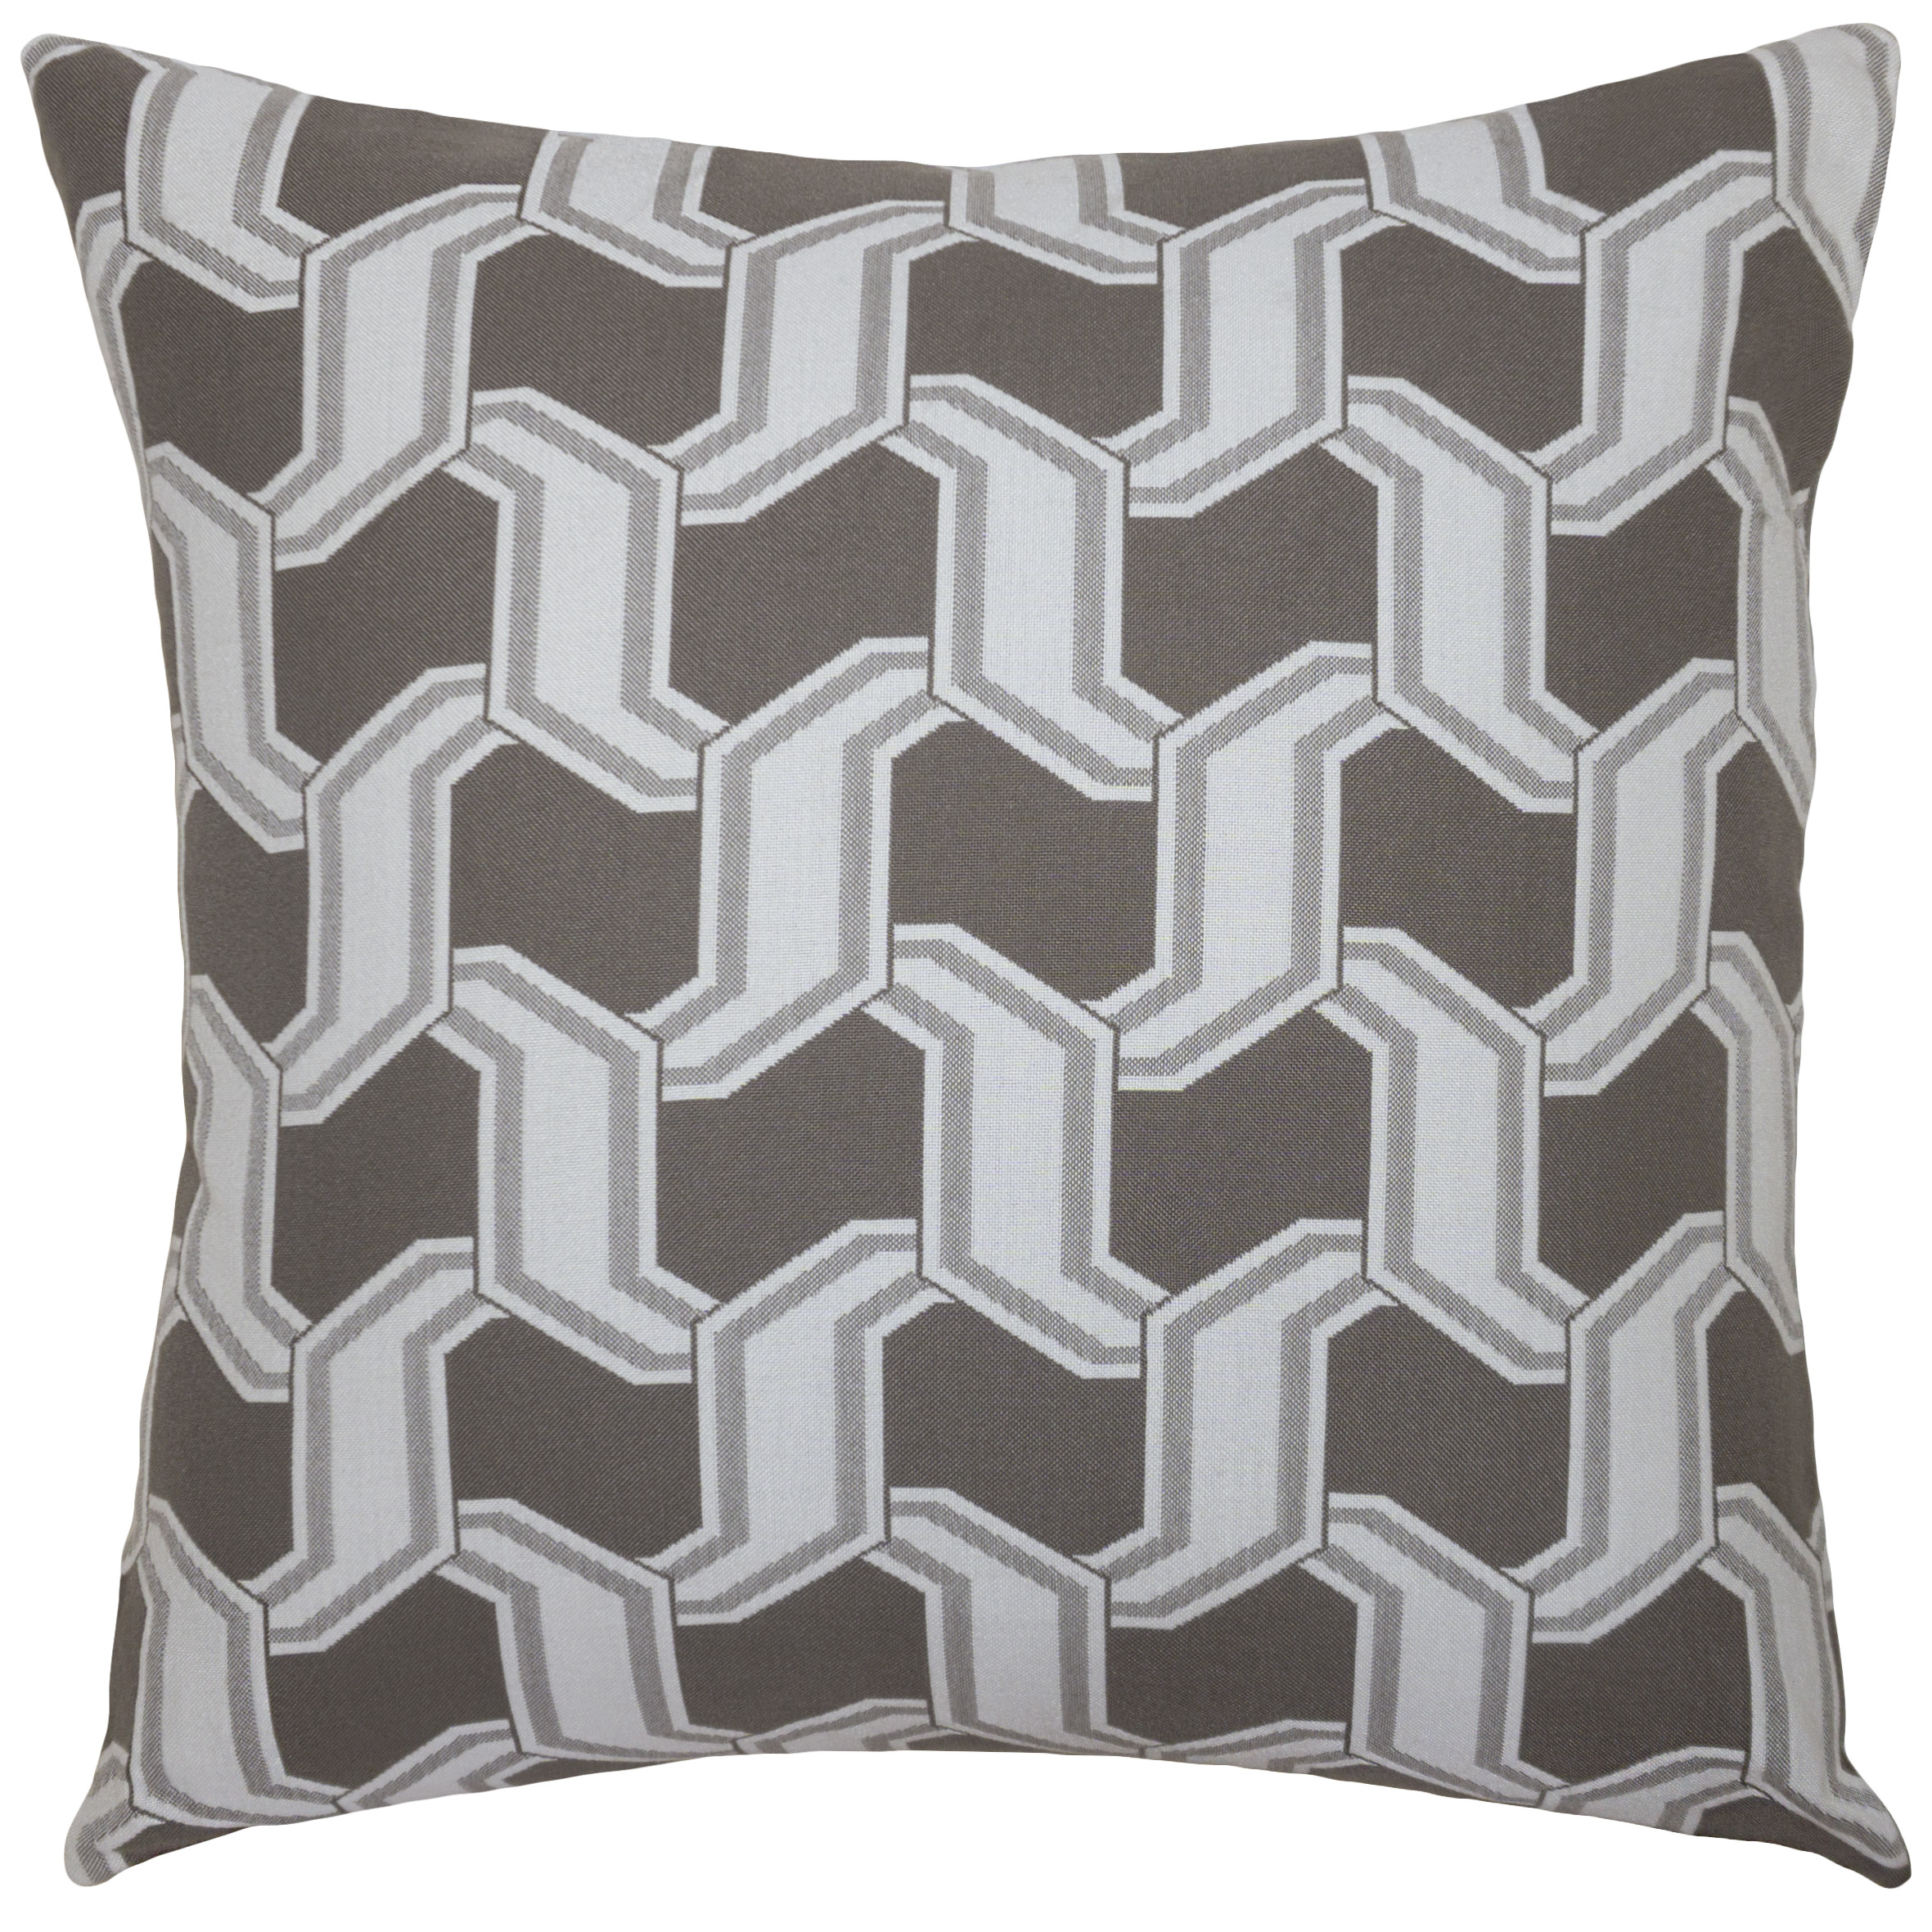 Chain Stone Outdoor Pillow